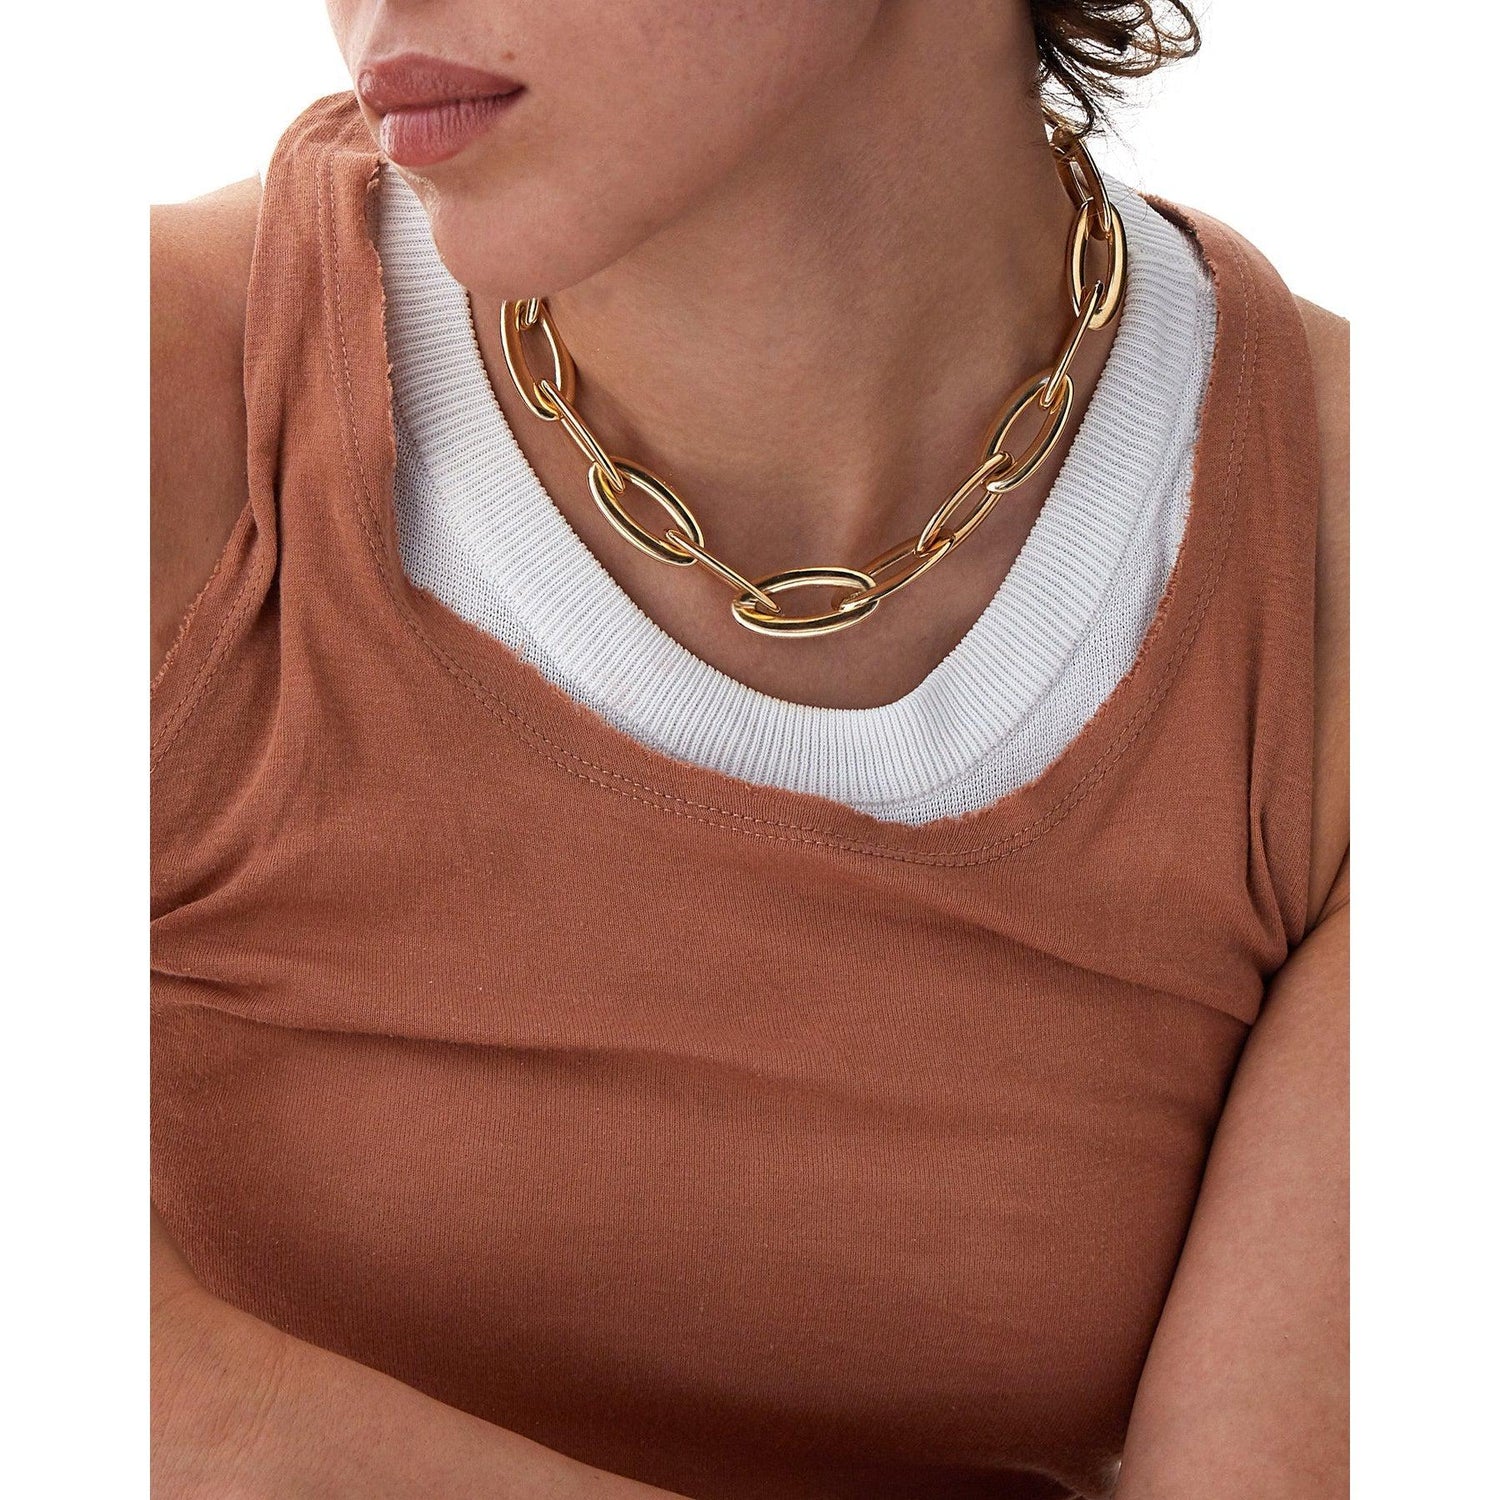 SUNSET "LIBERA ICON" ROSE GOLD NECKLACE CHAIN